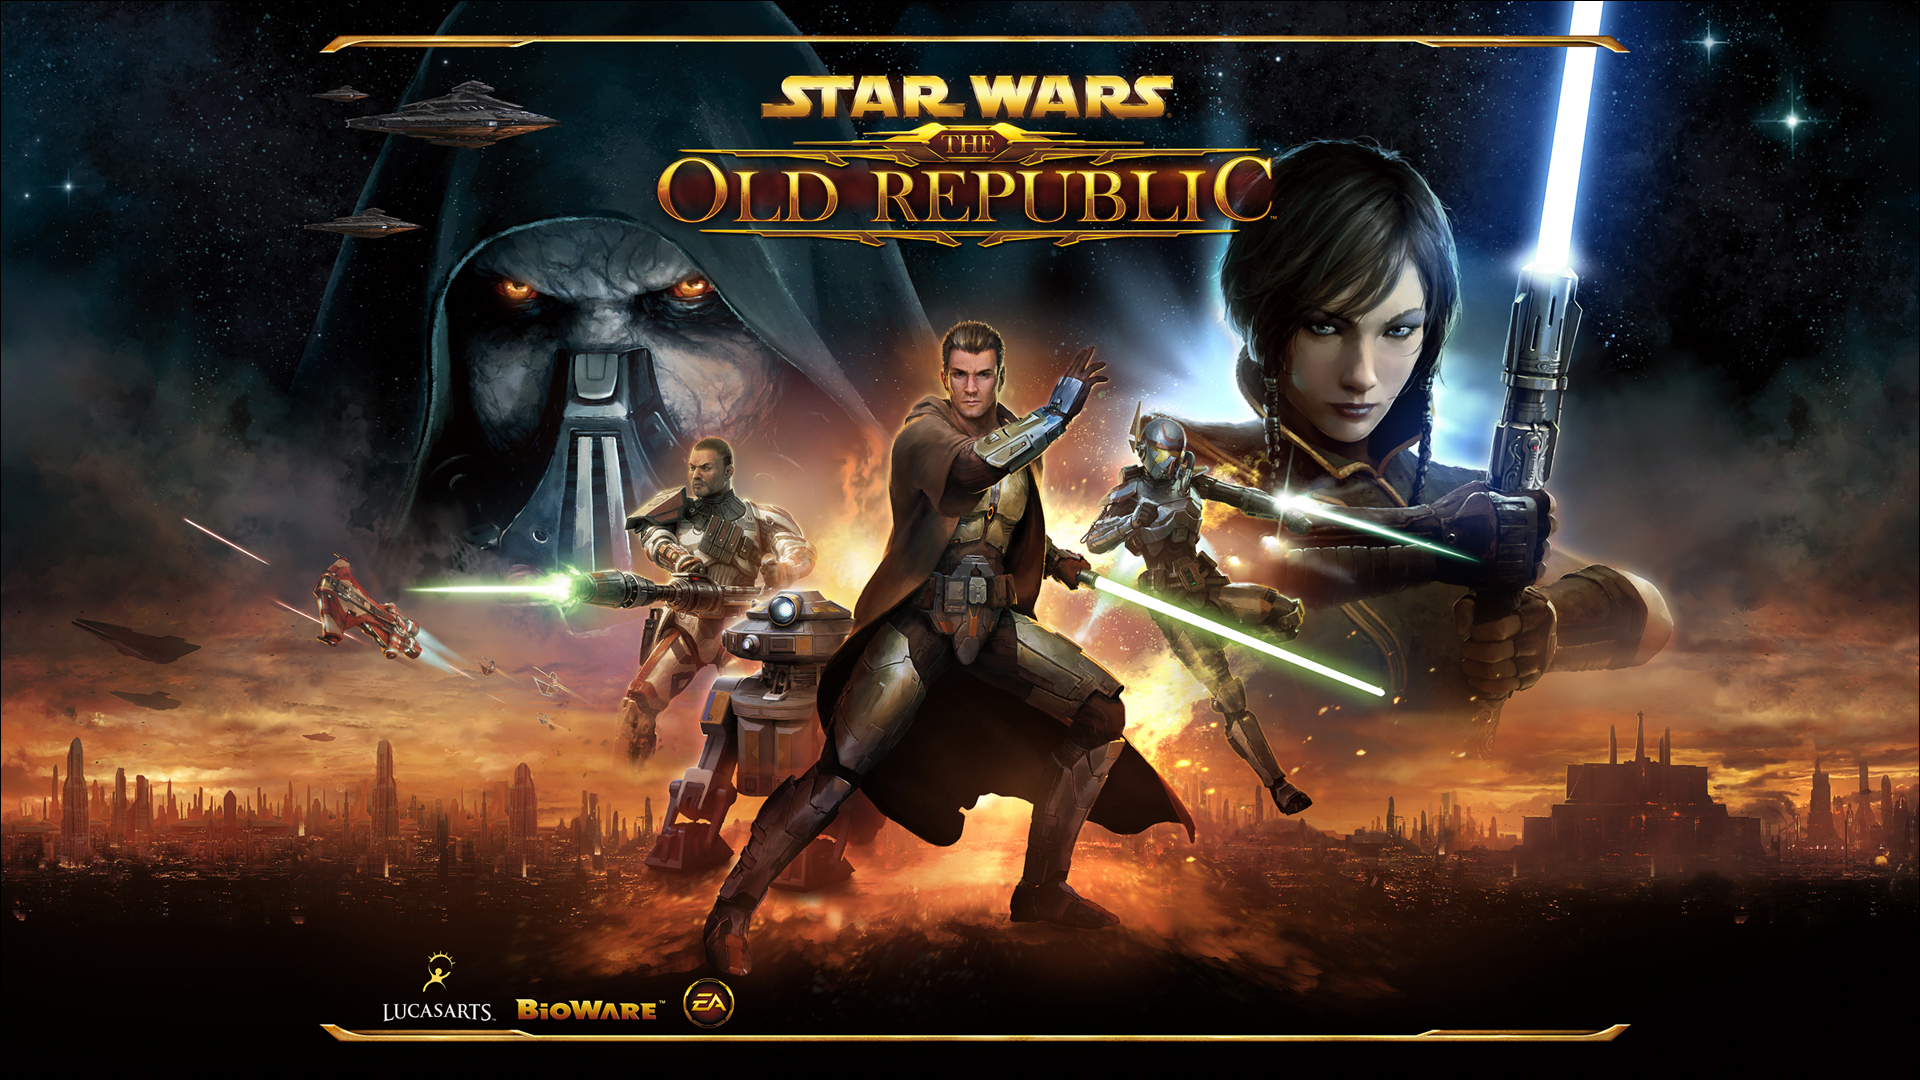 Star Wars: The Old Republic - Cinematic Trailer